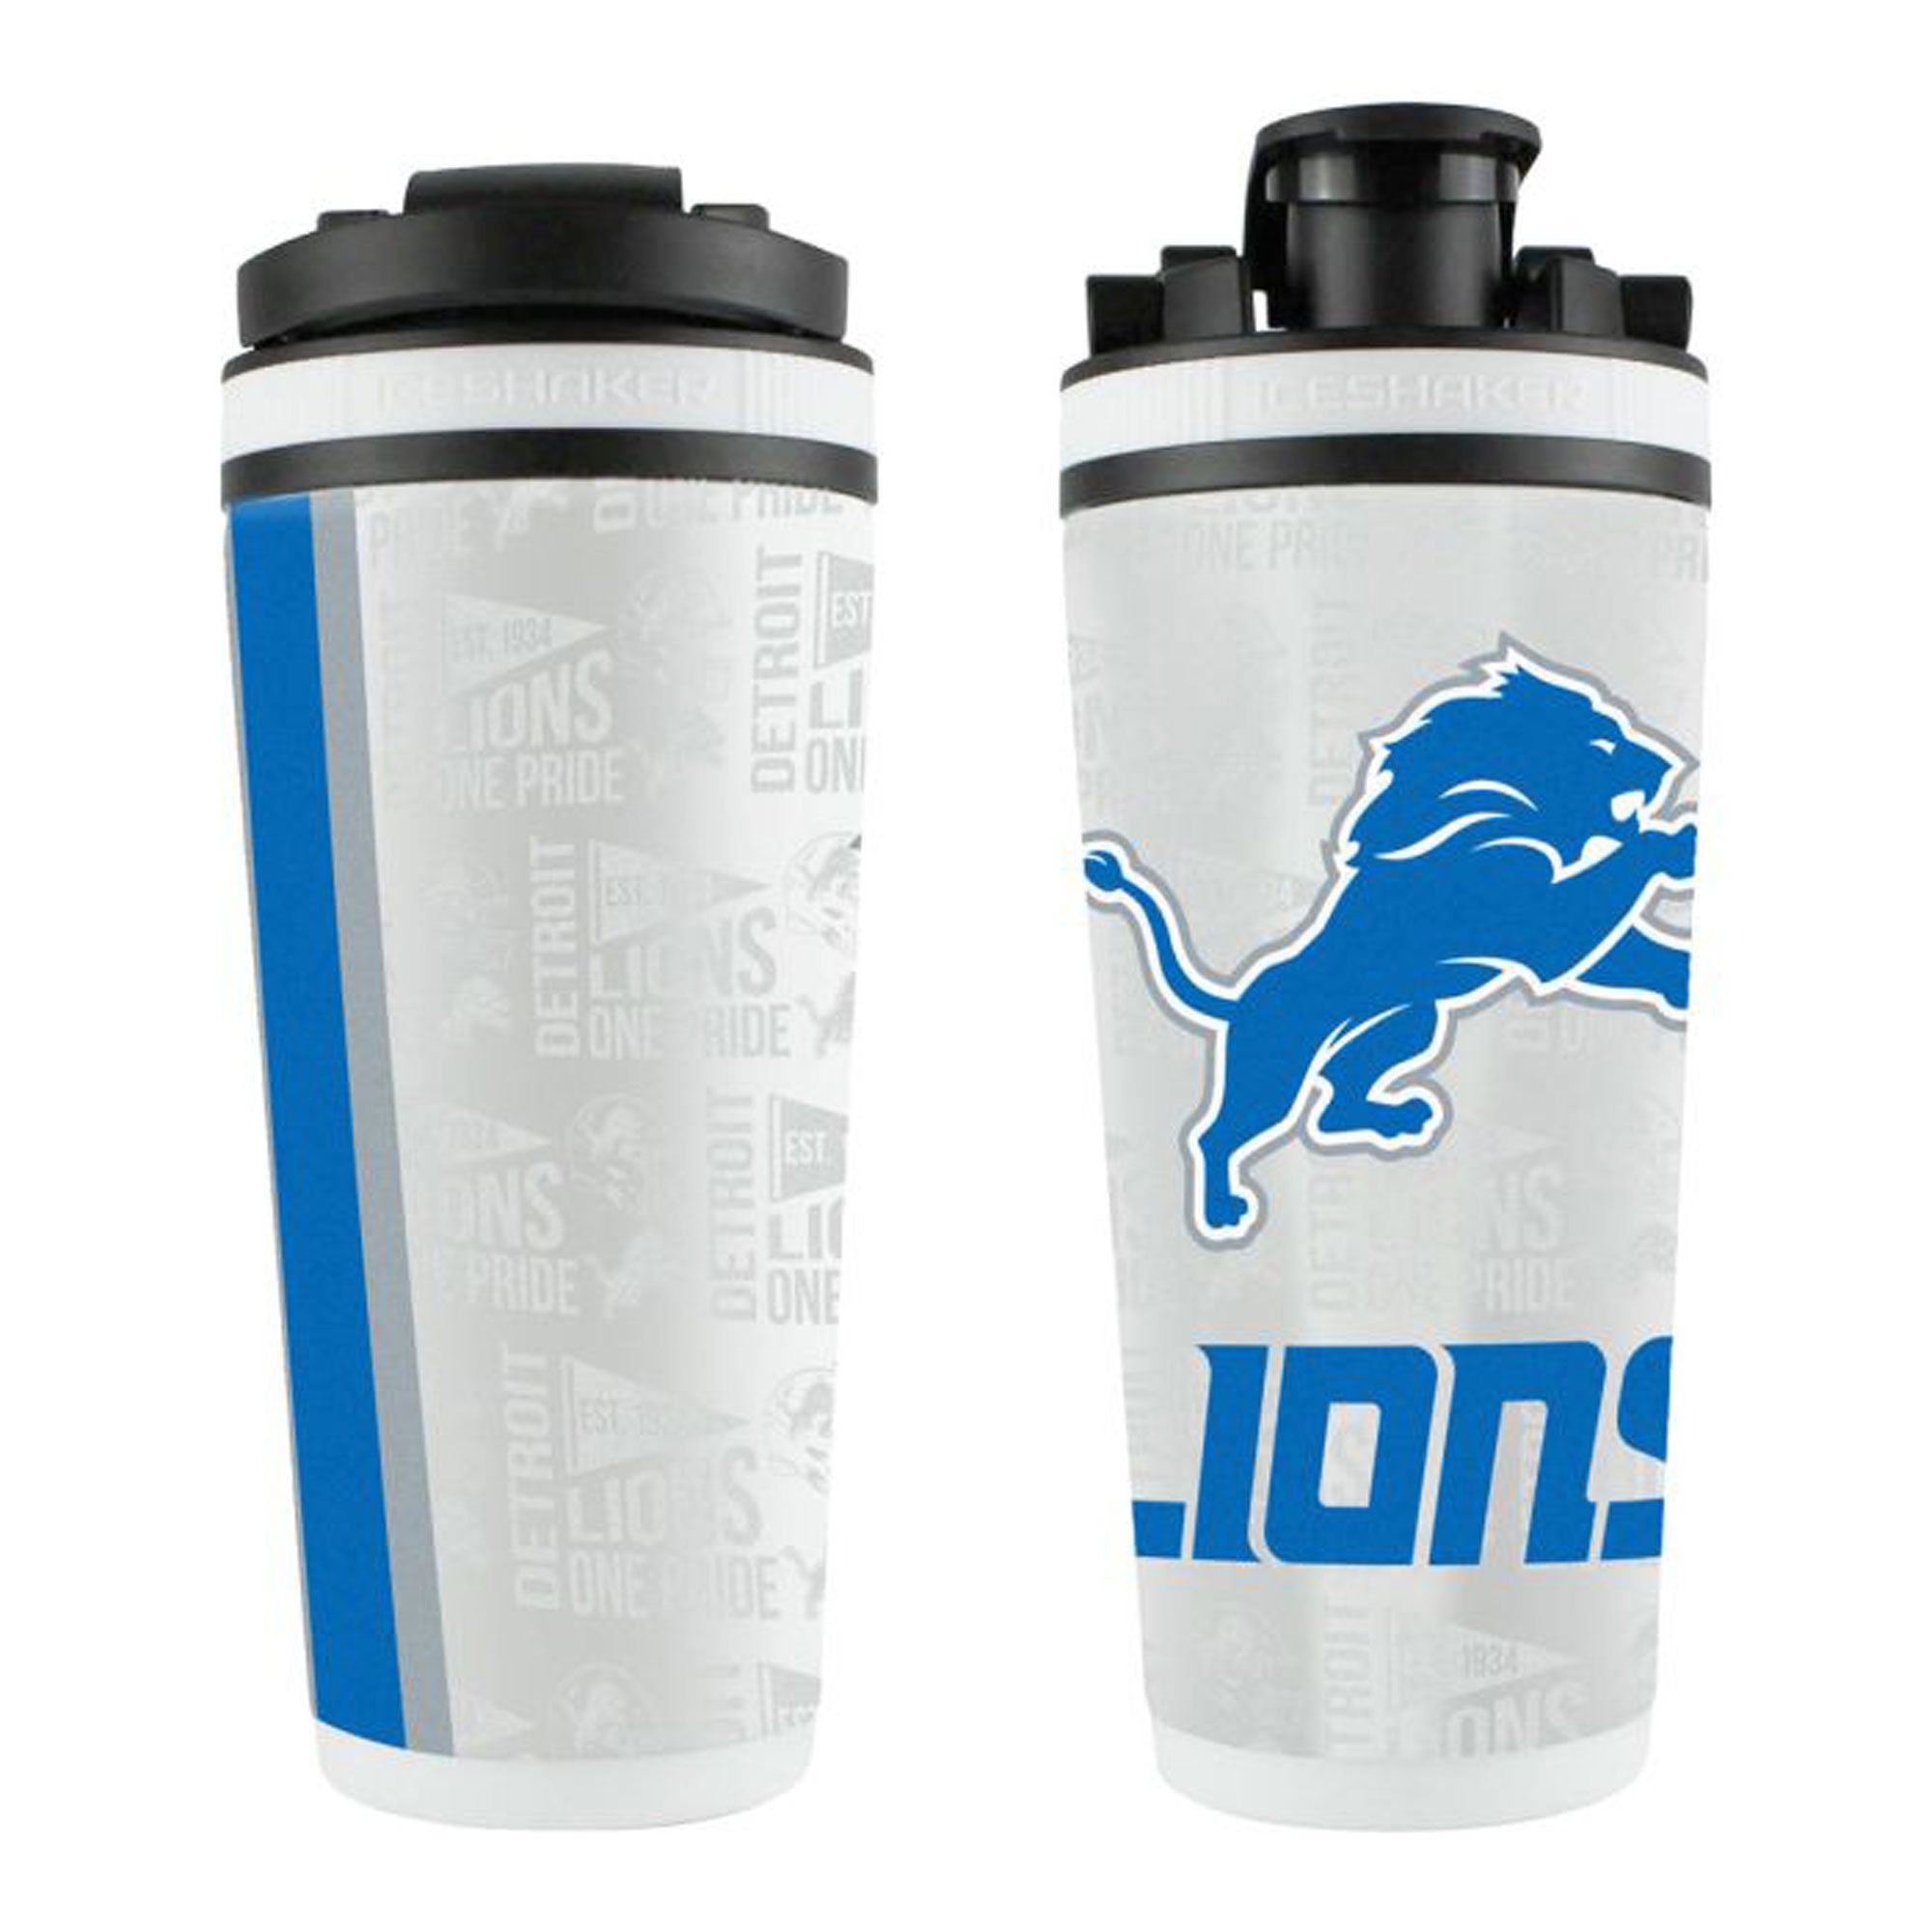 The Memory Company Detroit Lions Stainless Steel Shaker, Strainer